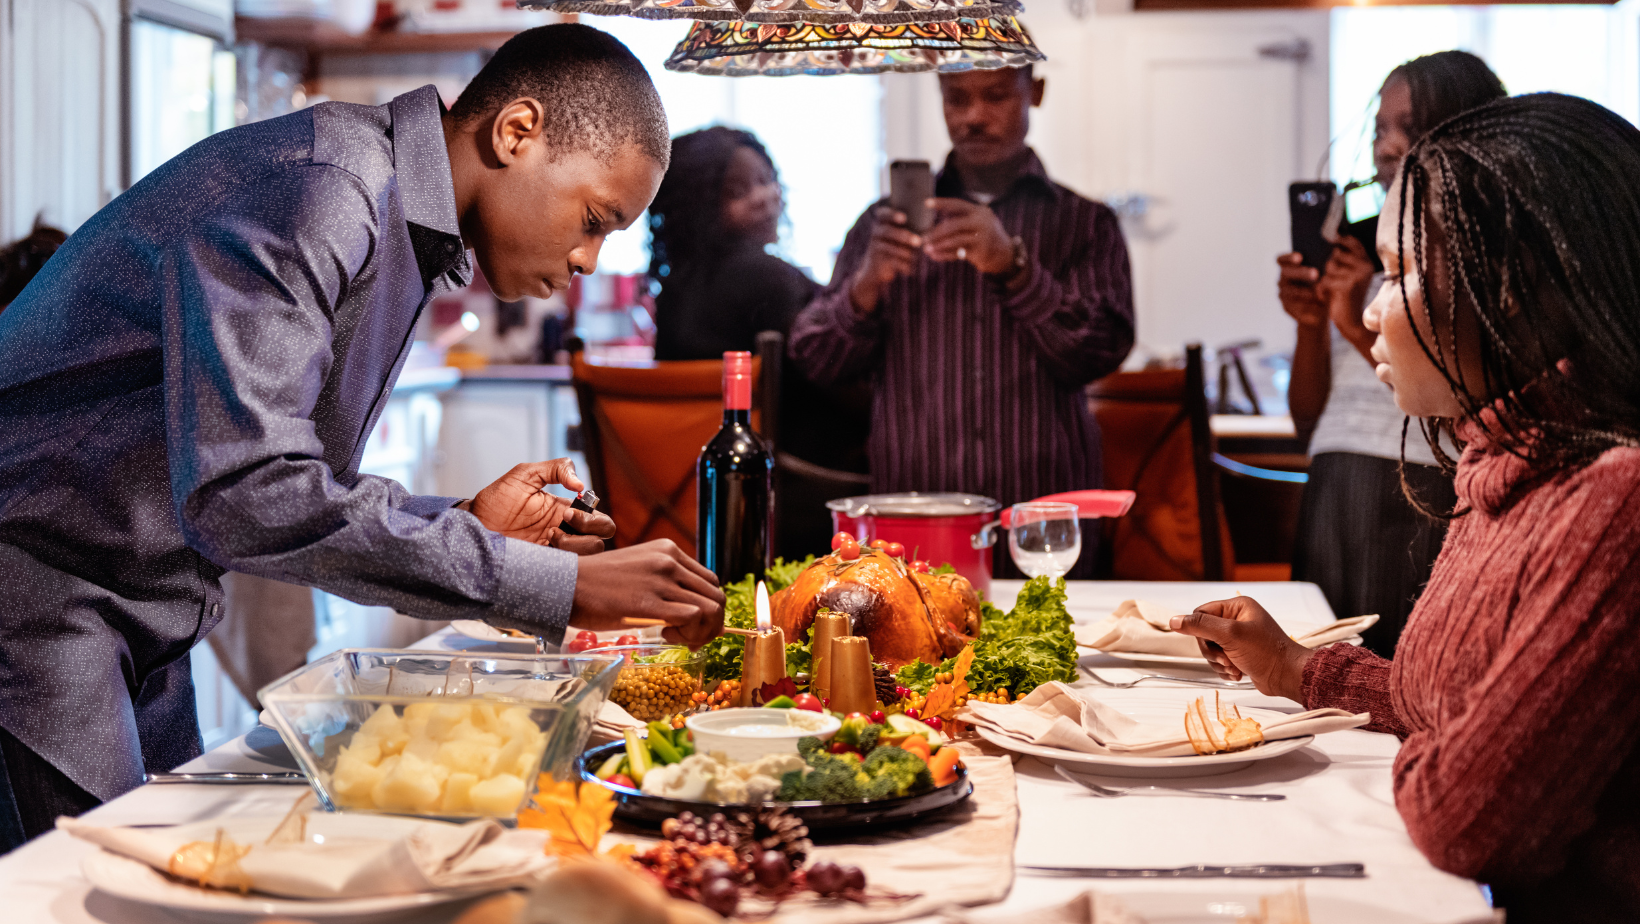 College Talk at the Turkey Table: How to Support Your Student